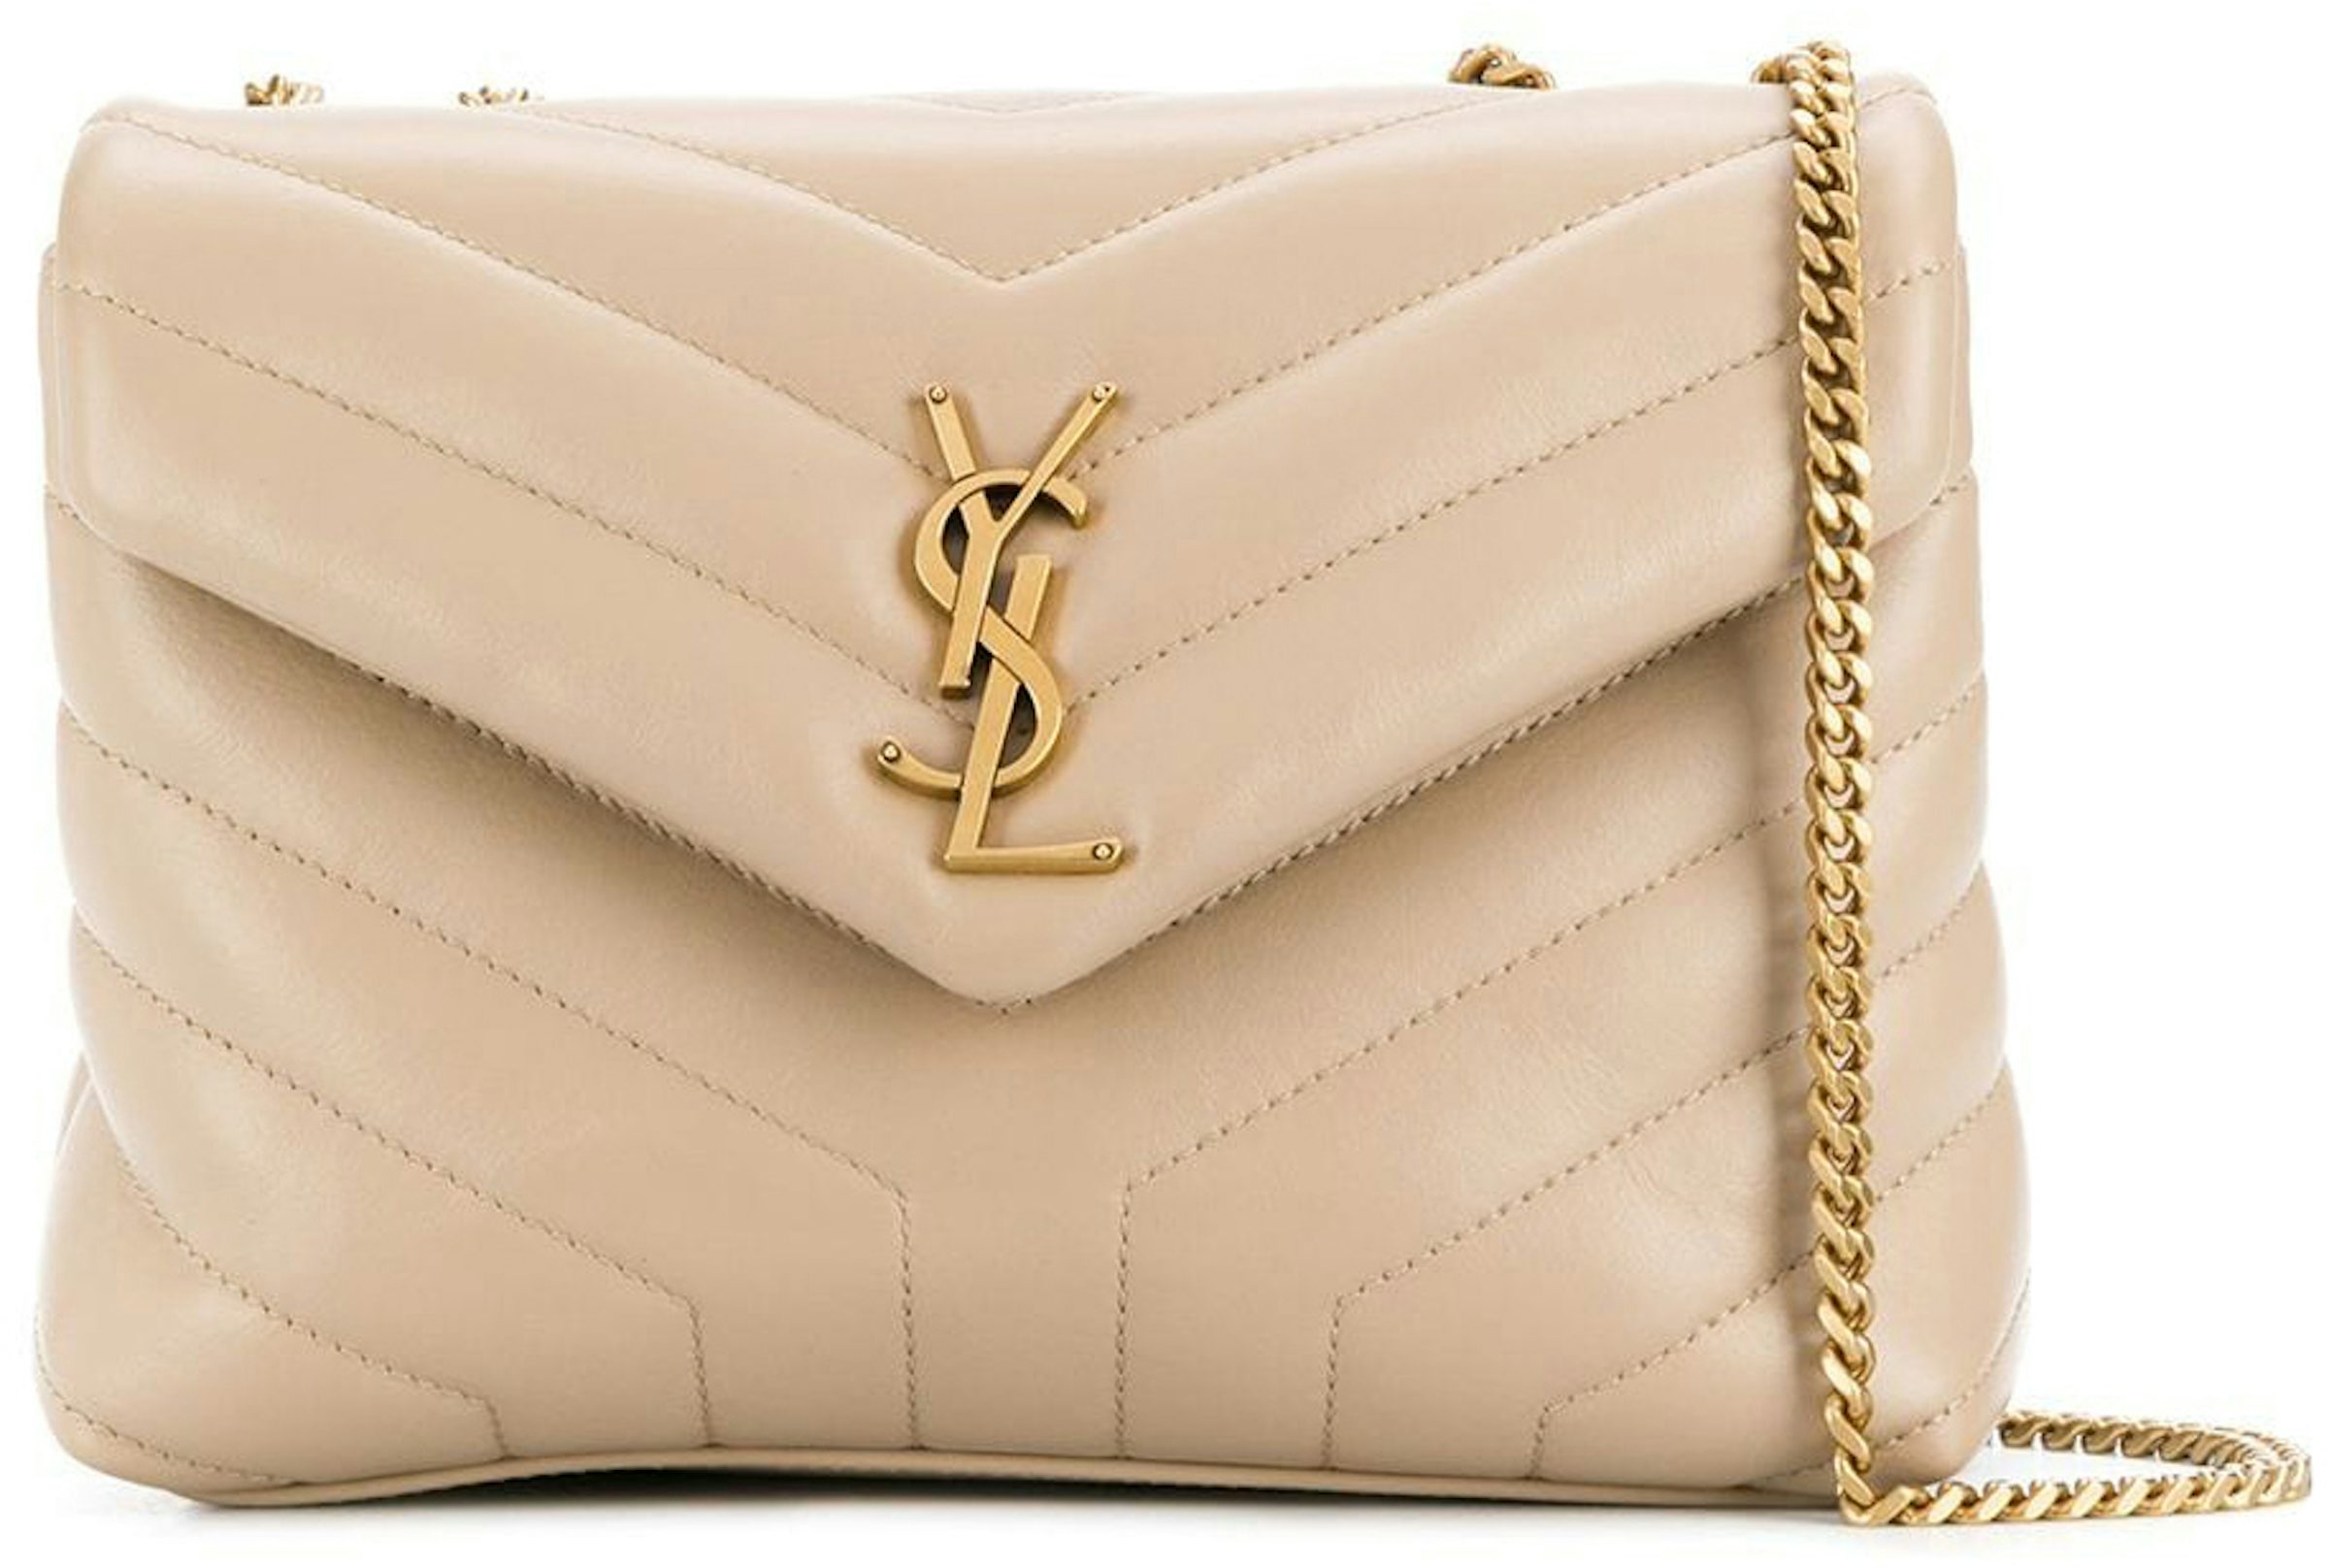 SAINT LAURENT Small White Leather Quilted Bag Loulou